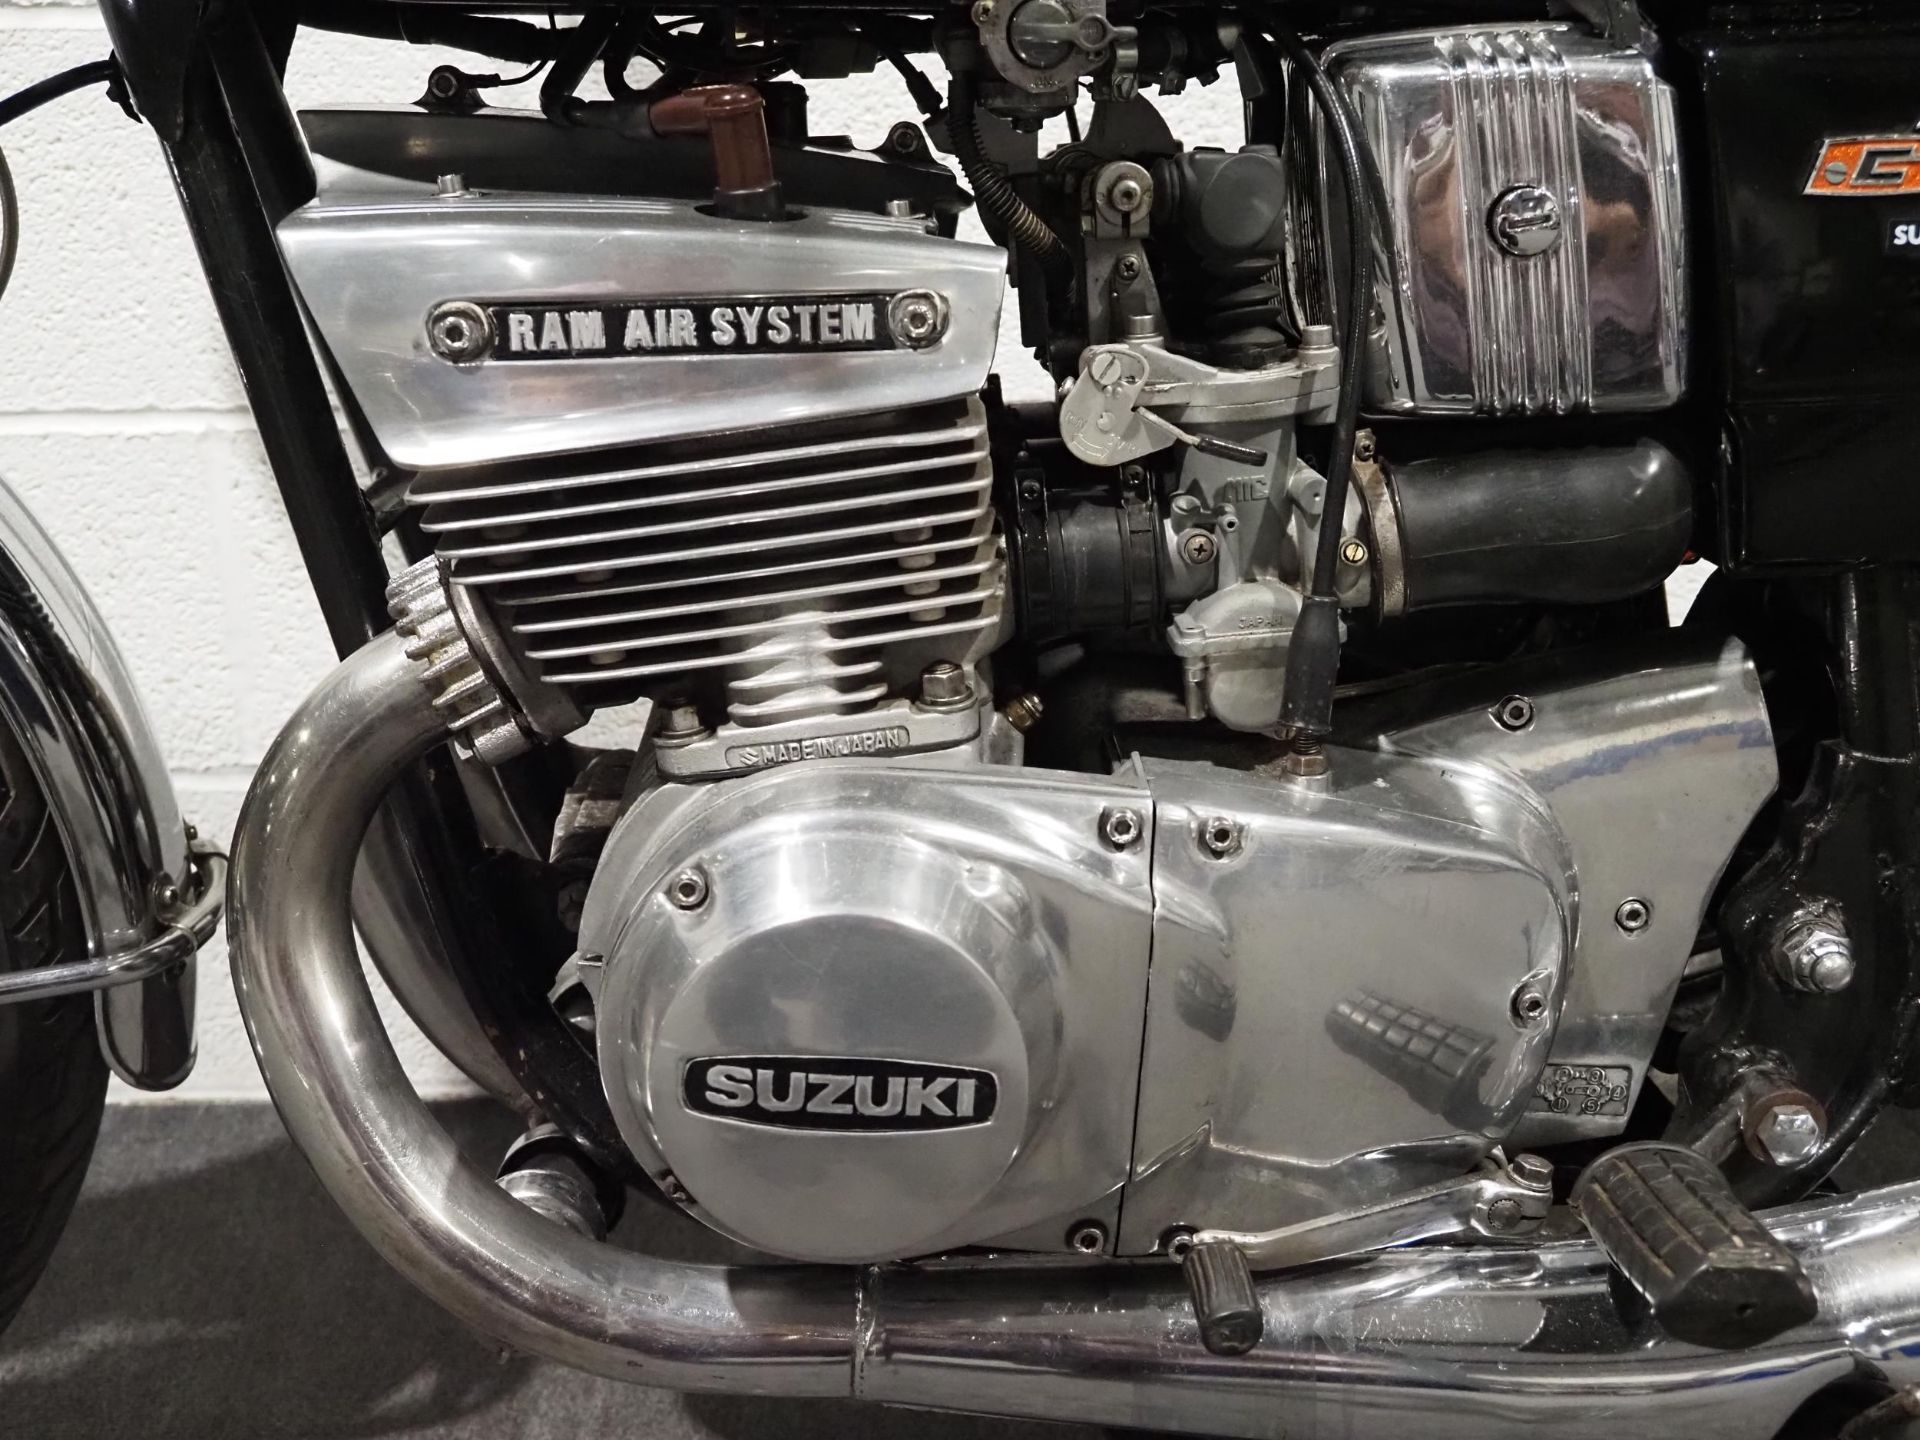 Suzuki GT550 motorcycle. 1976. 544cc. Frame No. 43210 Engine No. 45298 Out of private collection, - Image 8 of 9